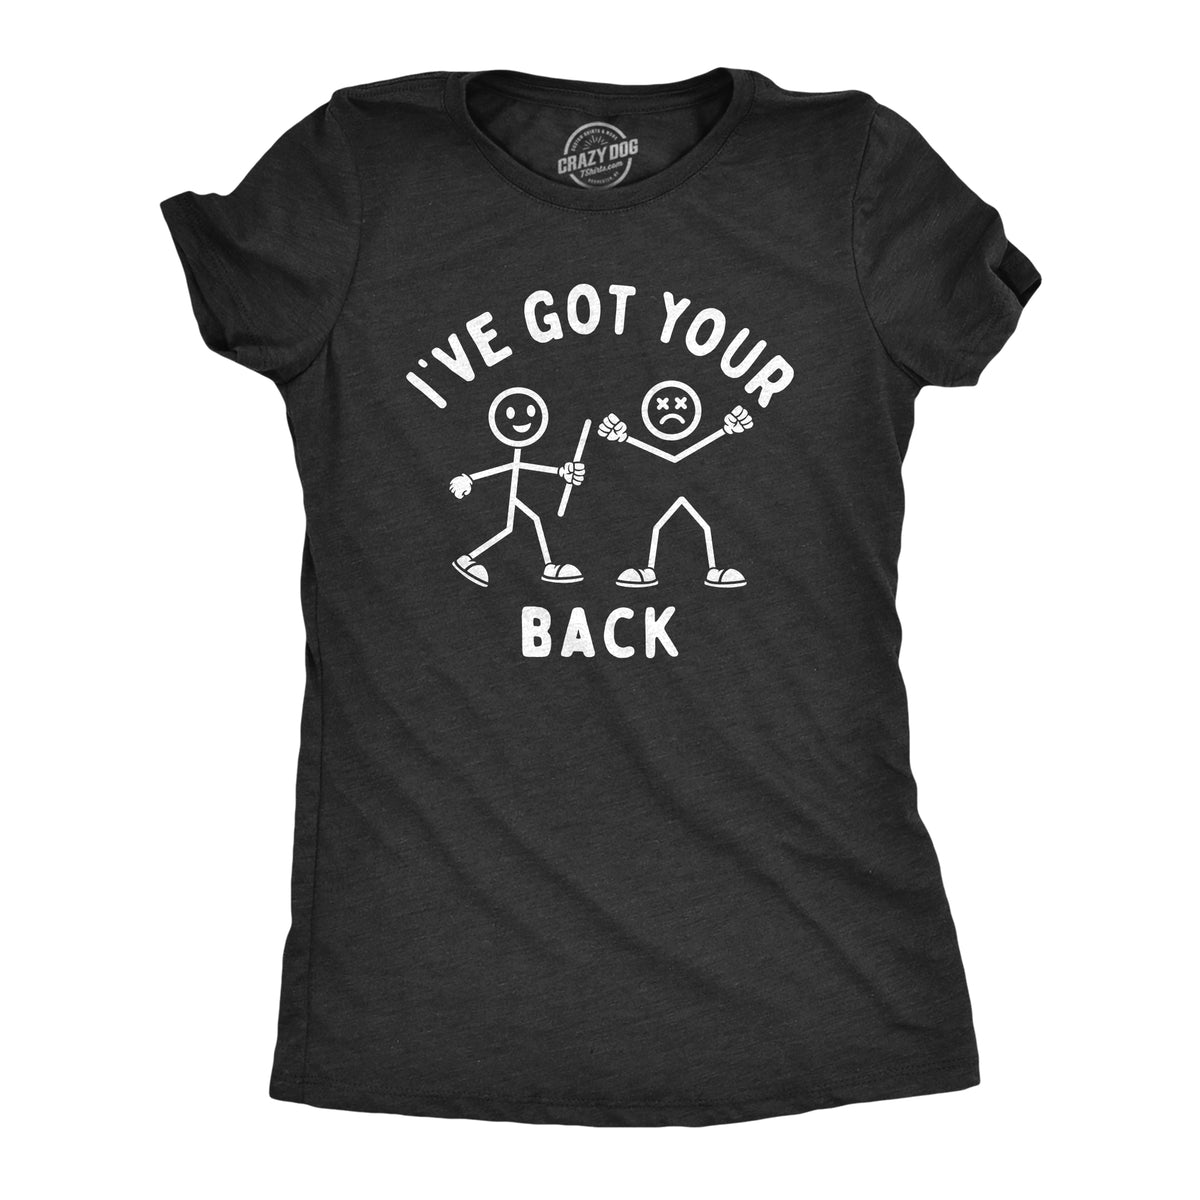 Funny Heather Black - BACK Ive Got Your Back Womens T Shirt Nerdy sarcastic Tee